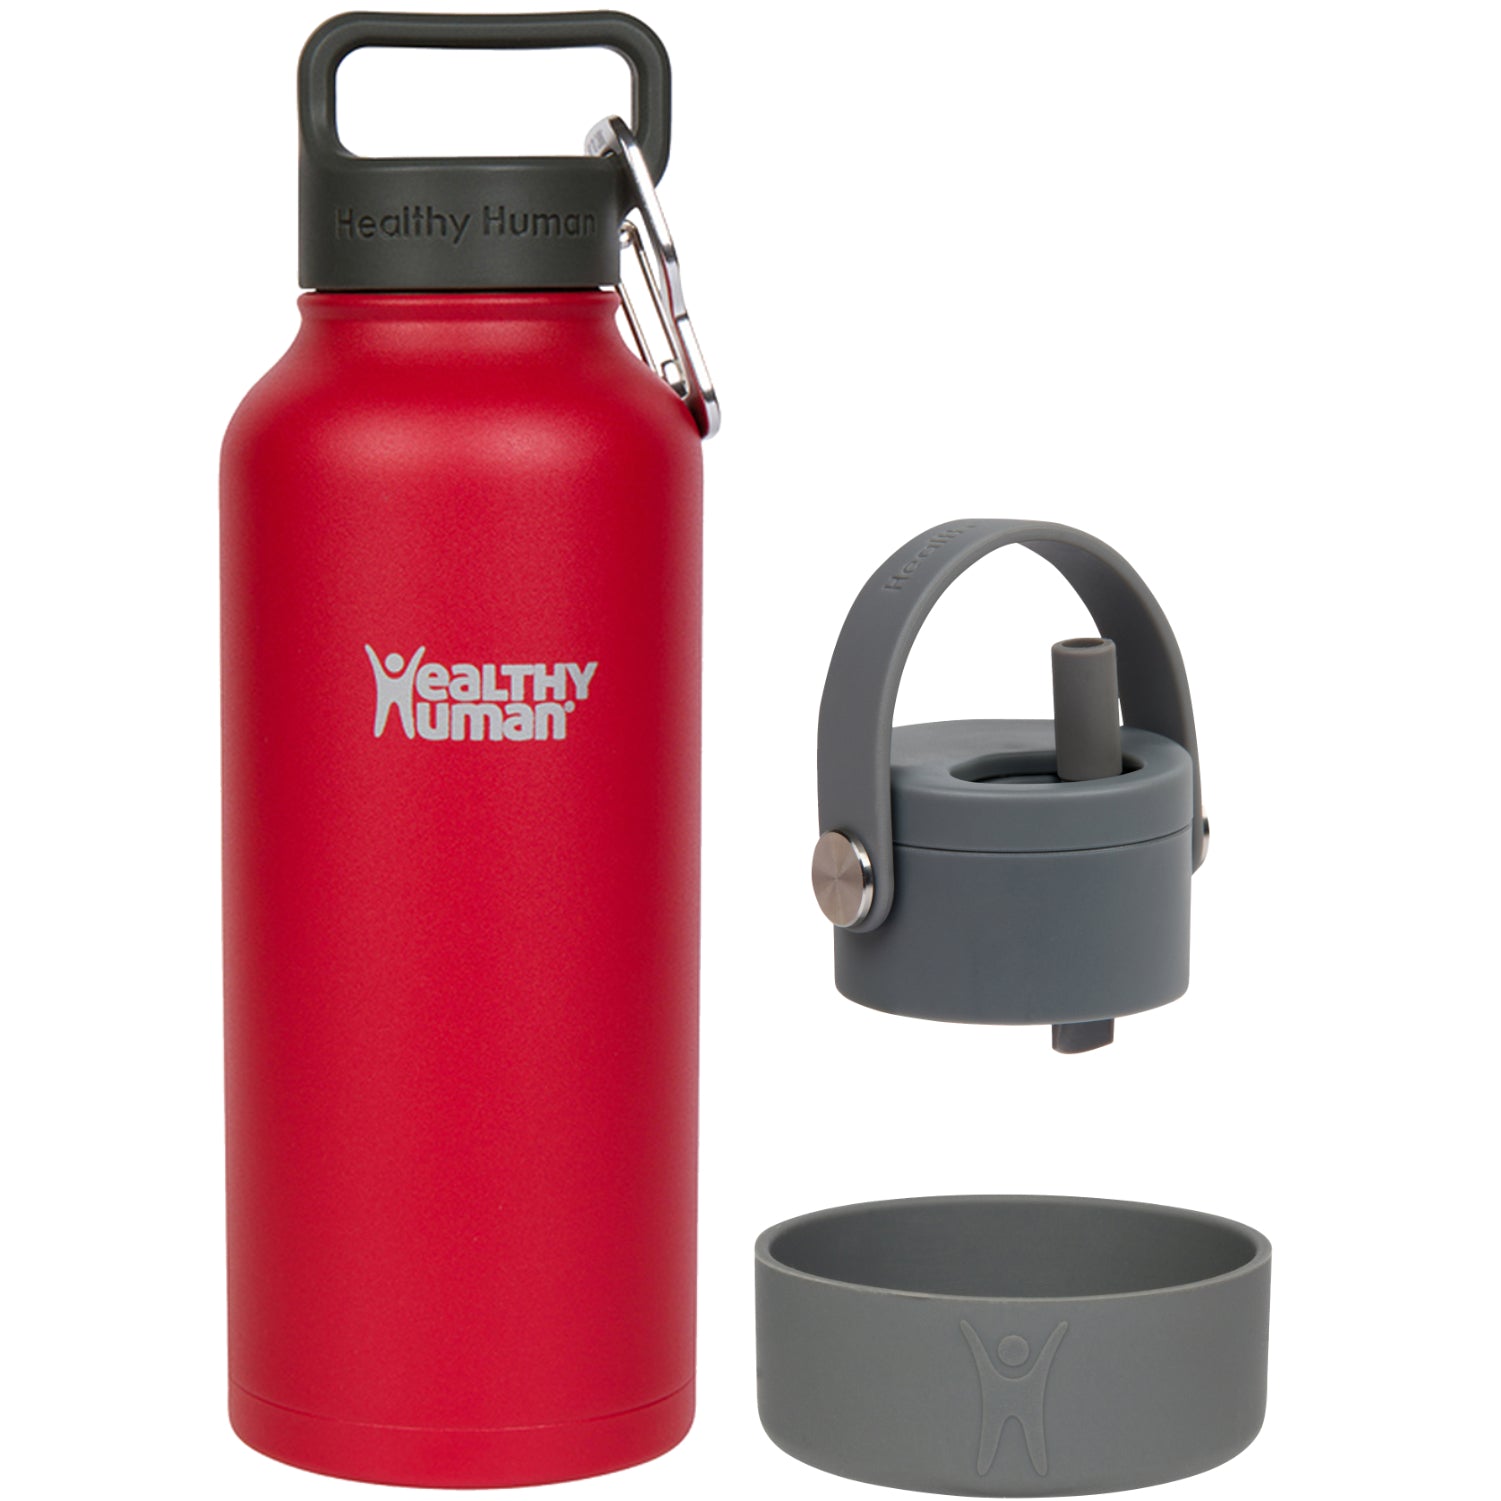 Plastic Hot and Cool Water Bottle